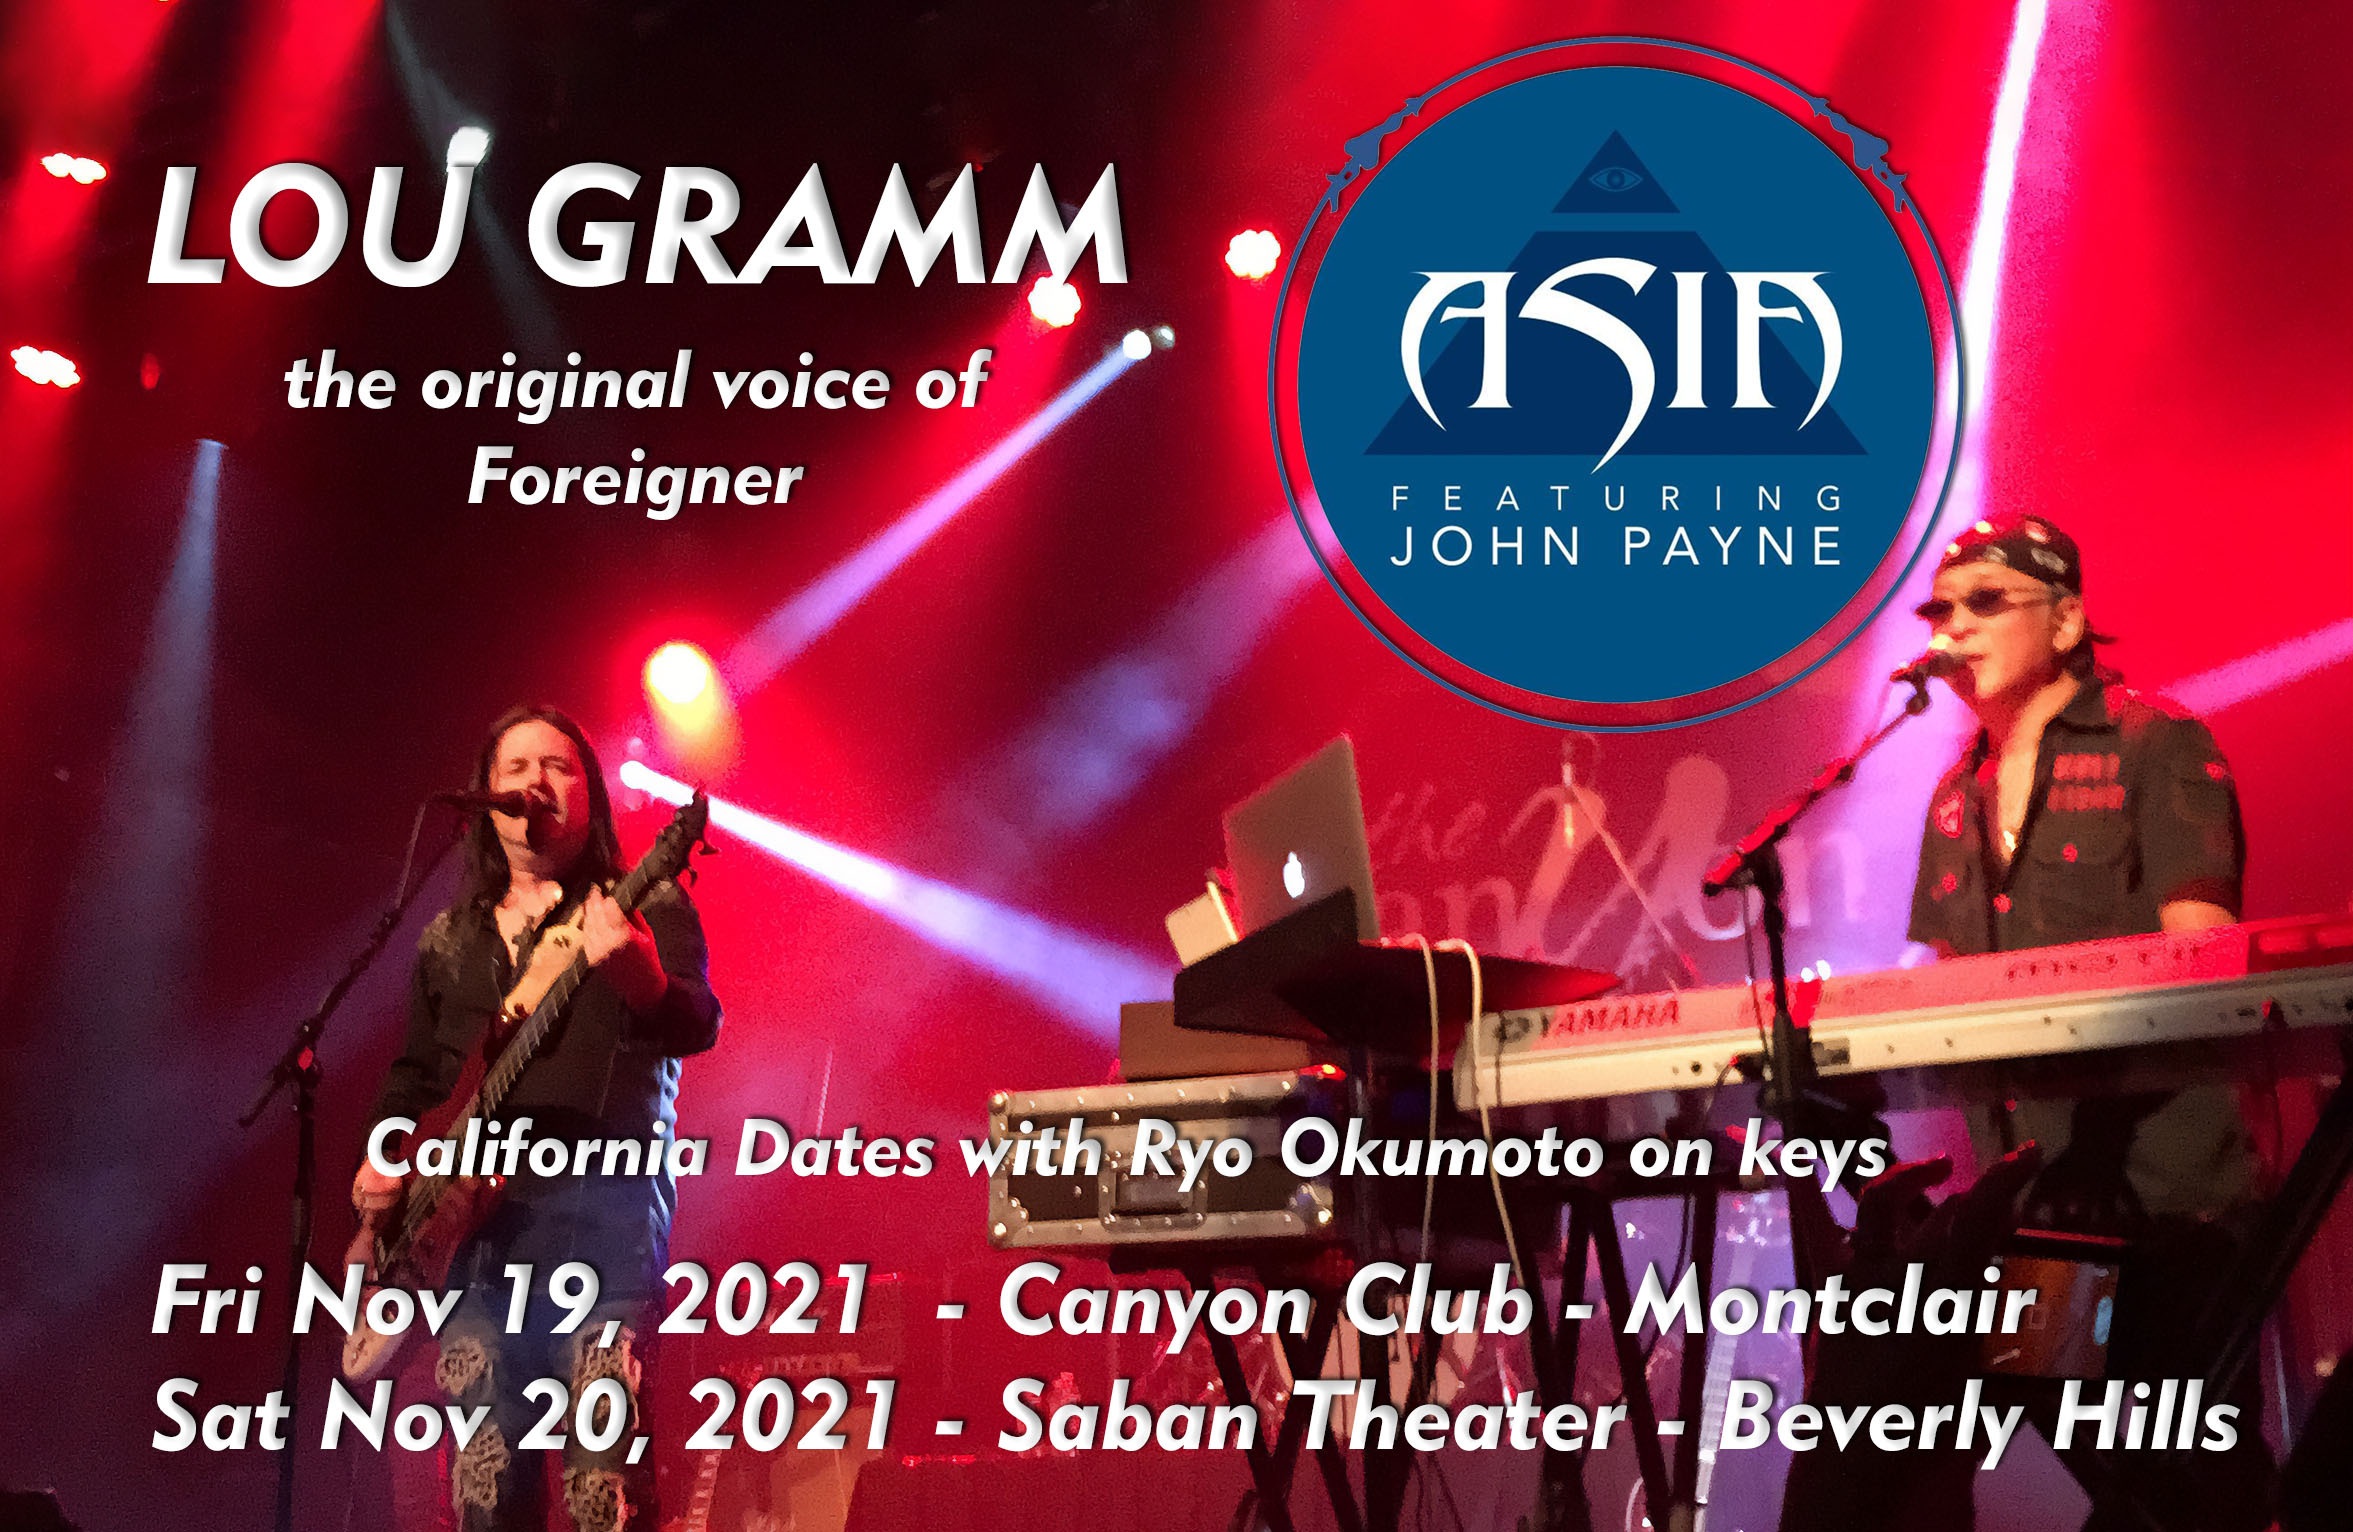 Playing with Lou Gramm and ASIA featuring John Payne this weekend!